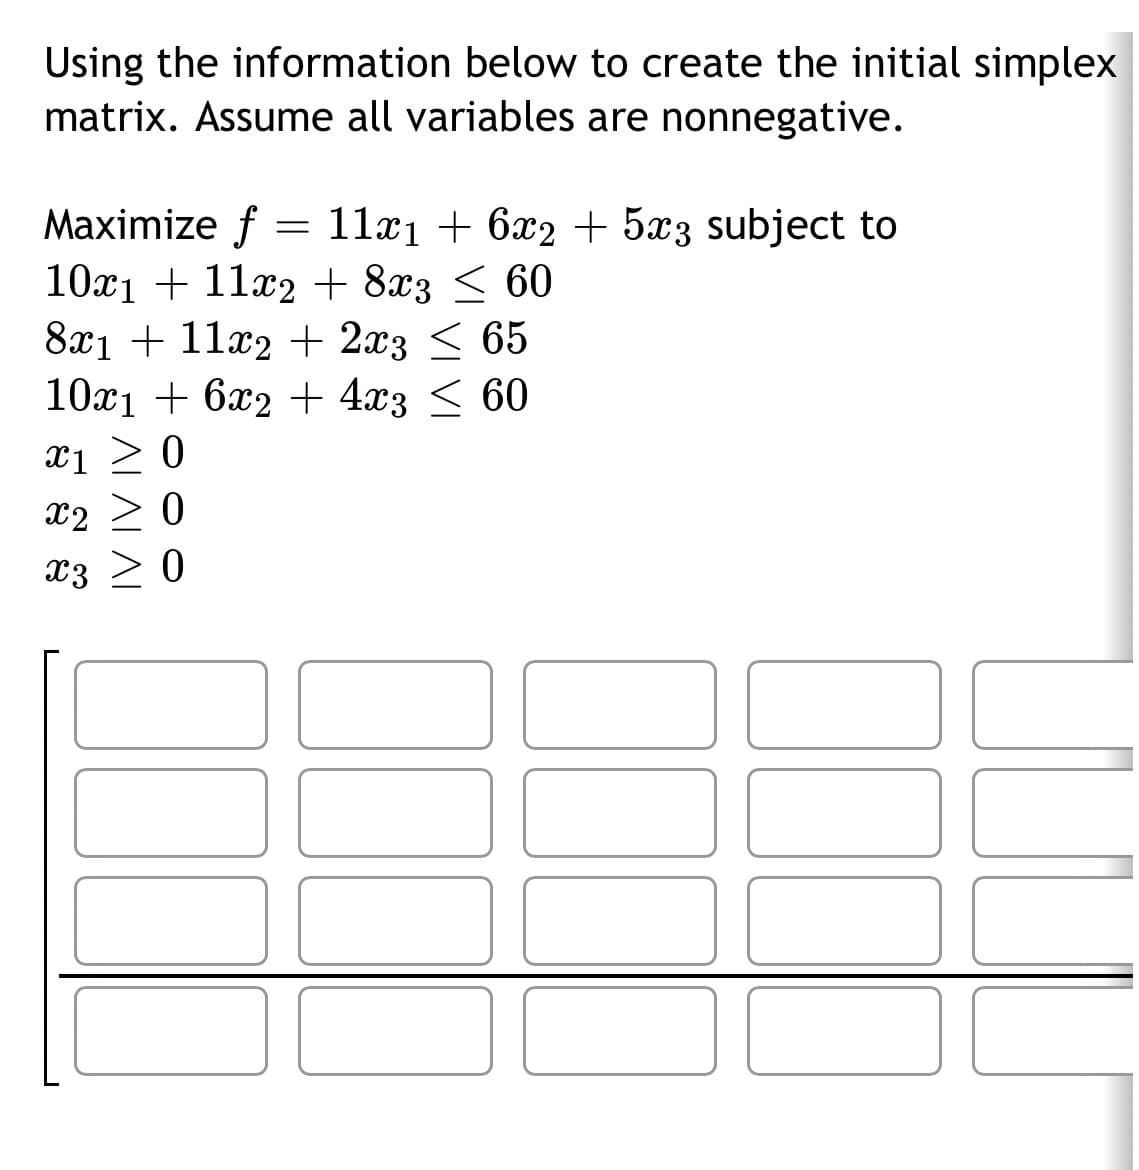 Using the information below to create the initial simplex
matrix. Assume all variables are nonnegative.
Maximize f
11x₁ + 6x2 + 5x3 subject to
10x₁ + 11x2 + 8x3 ≤ 60
8x1 + 11x2 + 2x3 ≤ 65
10x1 + 6x2 + 4x3 ≤ 60
X1 ≥ 0
X2 ≥ 0
x3 > 0
100
=